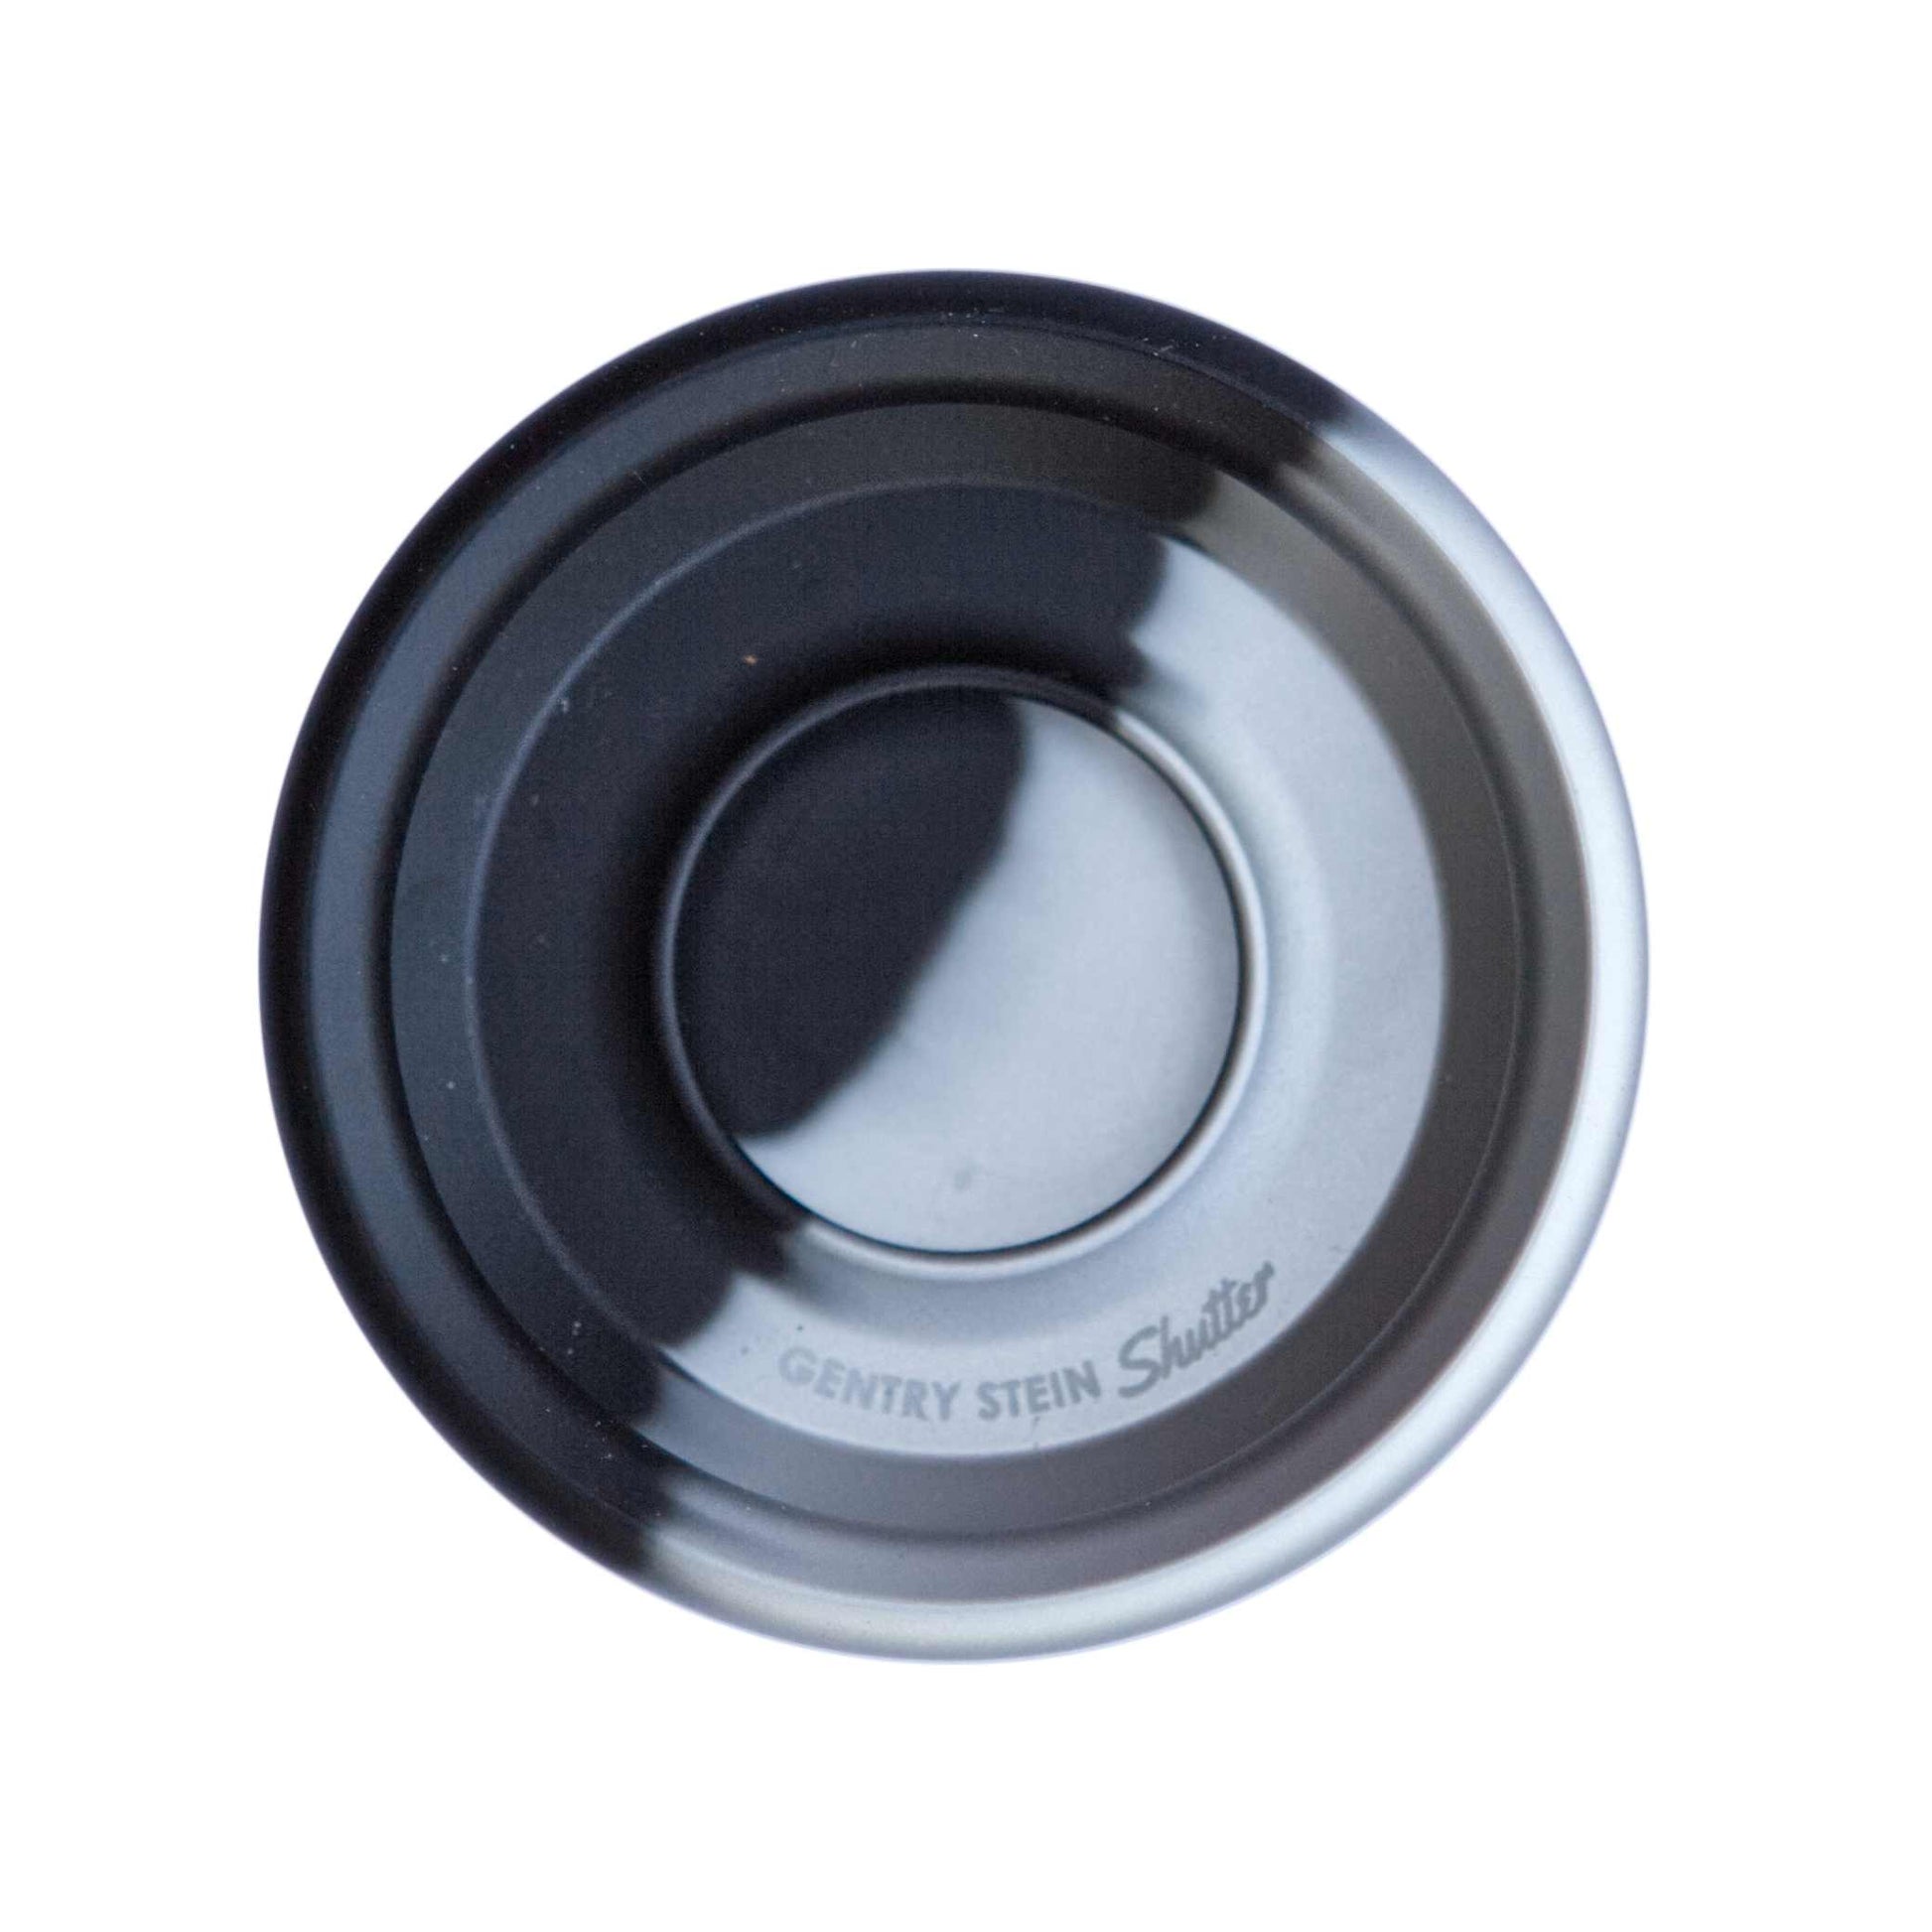 Shutter YoYo black and silver side view